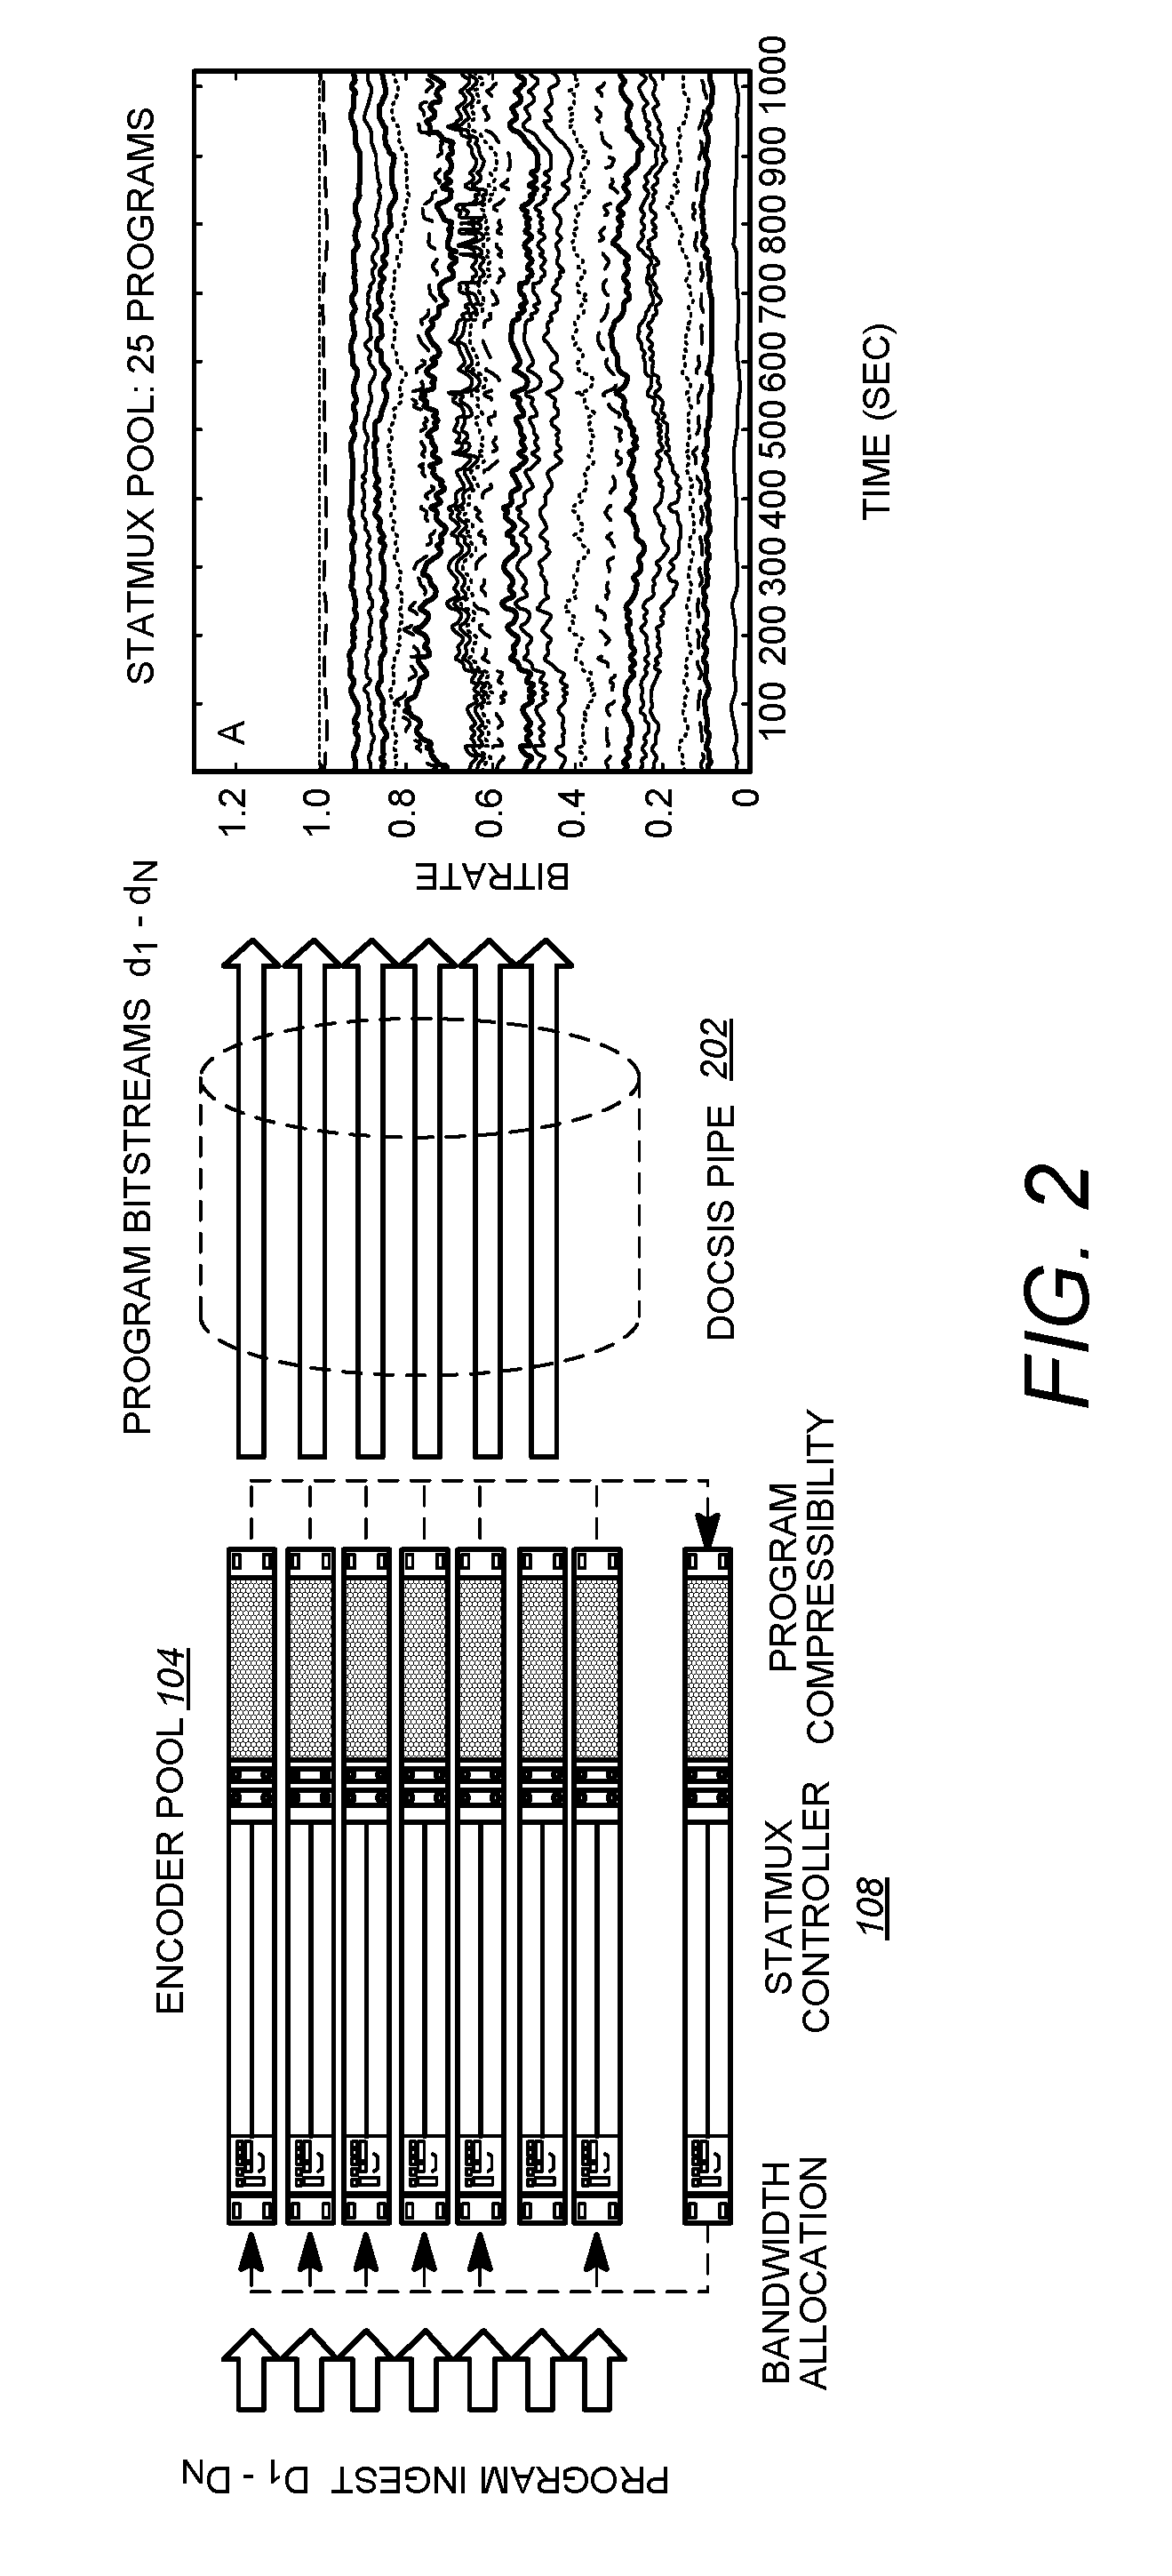 Analytic tool for managing distributed statistically multiplexed systems and method for using same